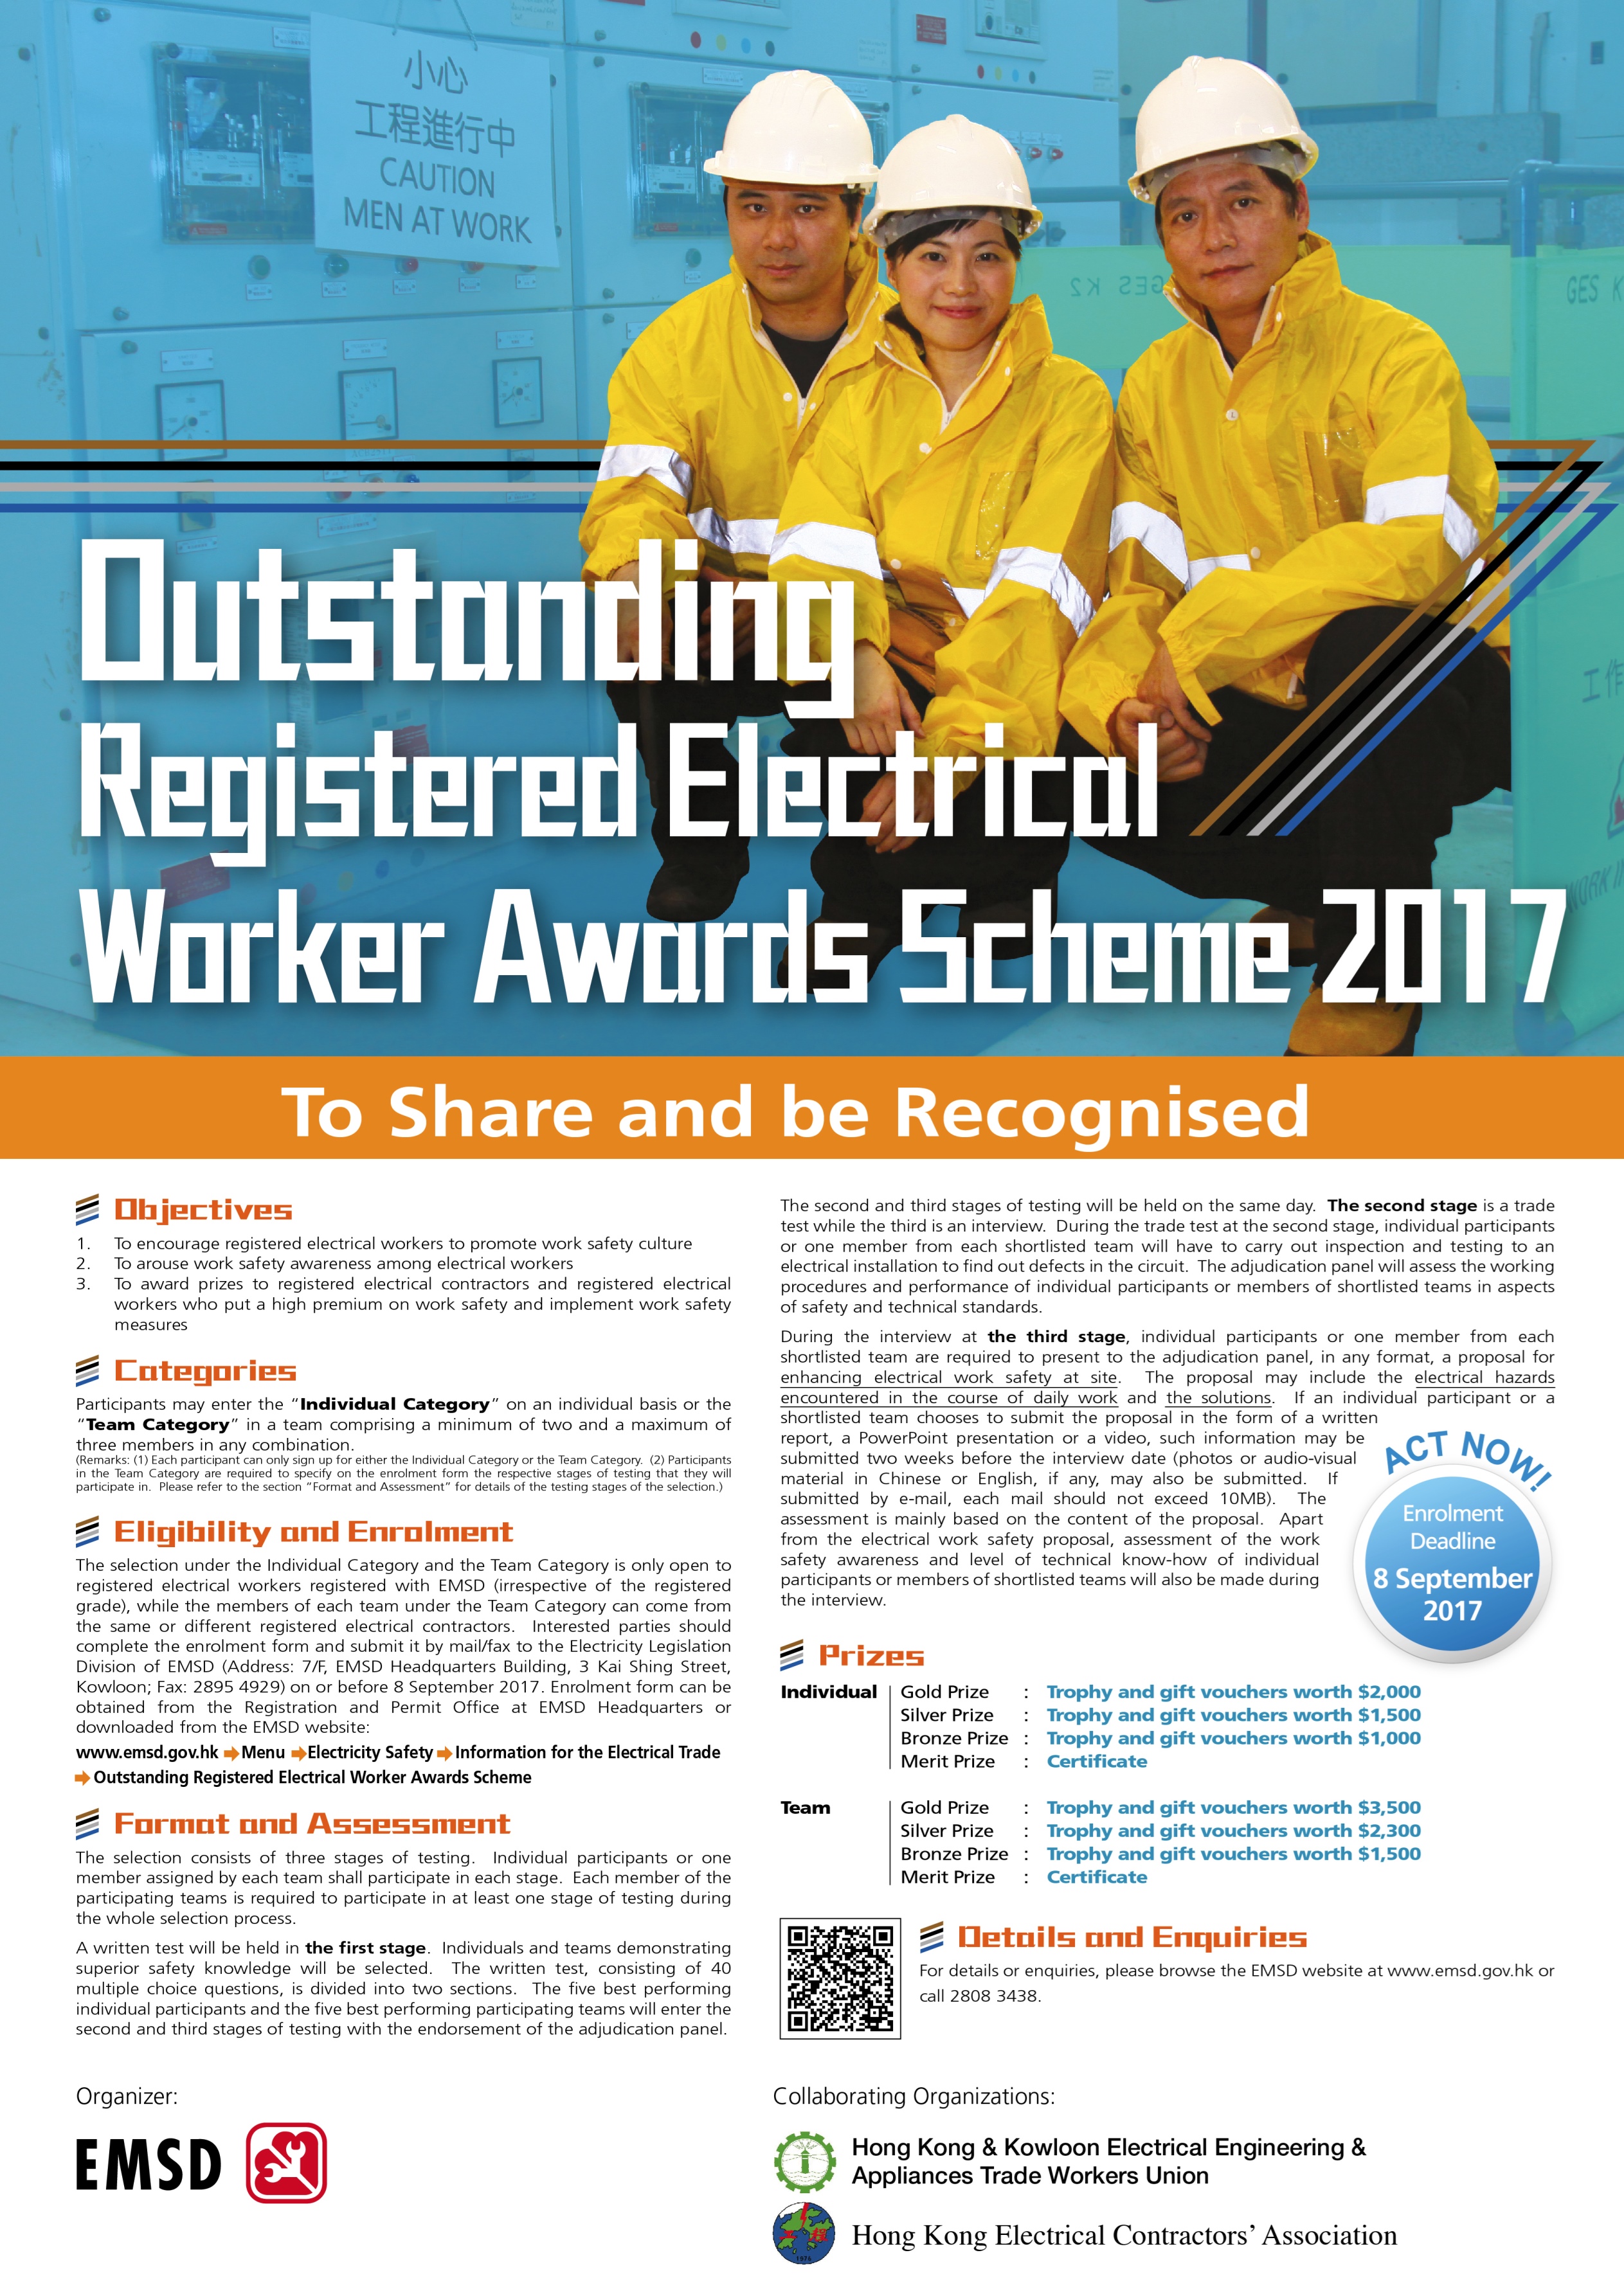 Outstanding Registered Electrical Worker Awards Scheme 2017